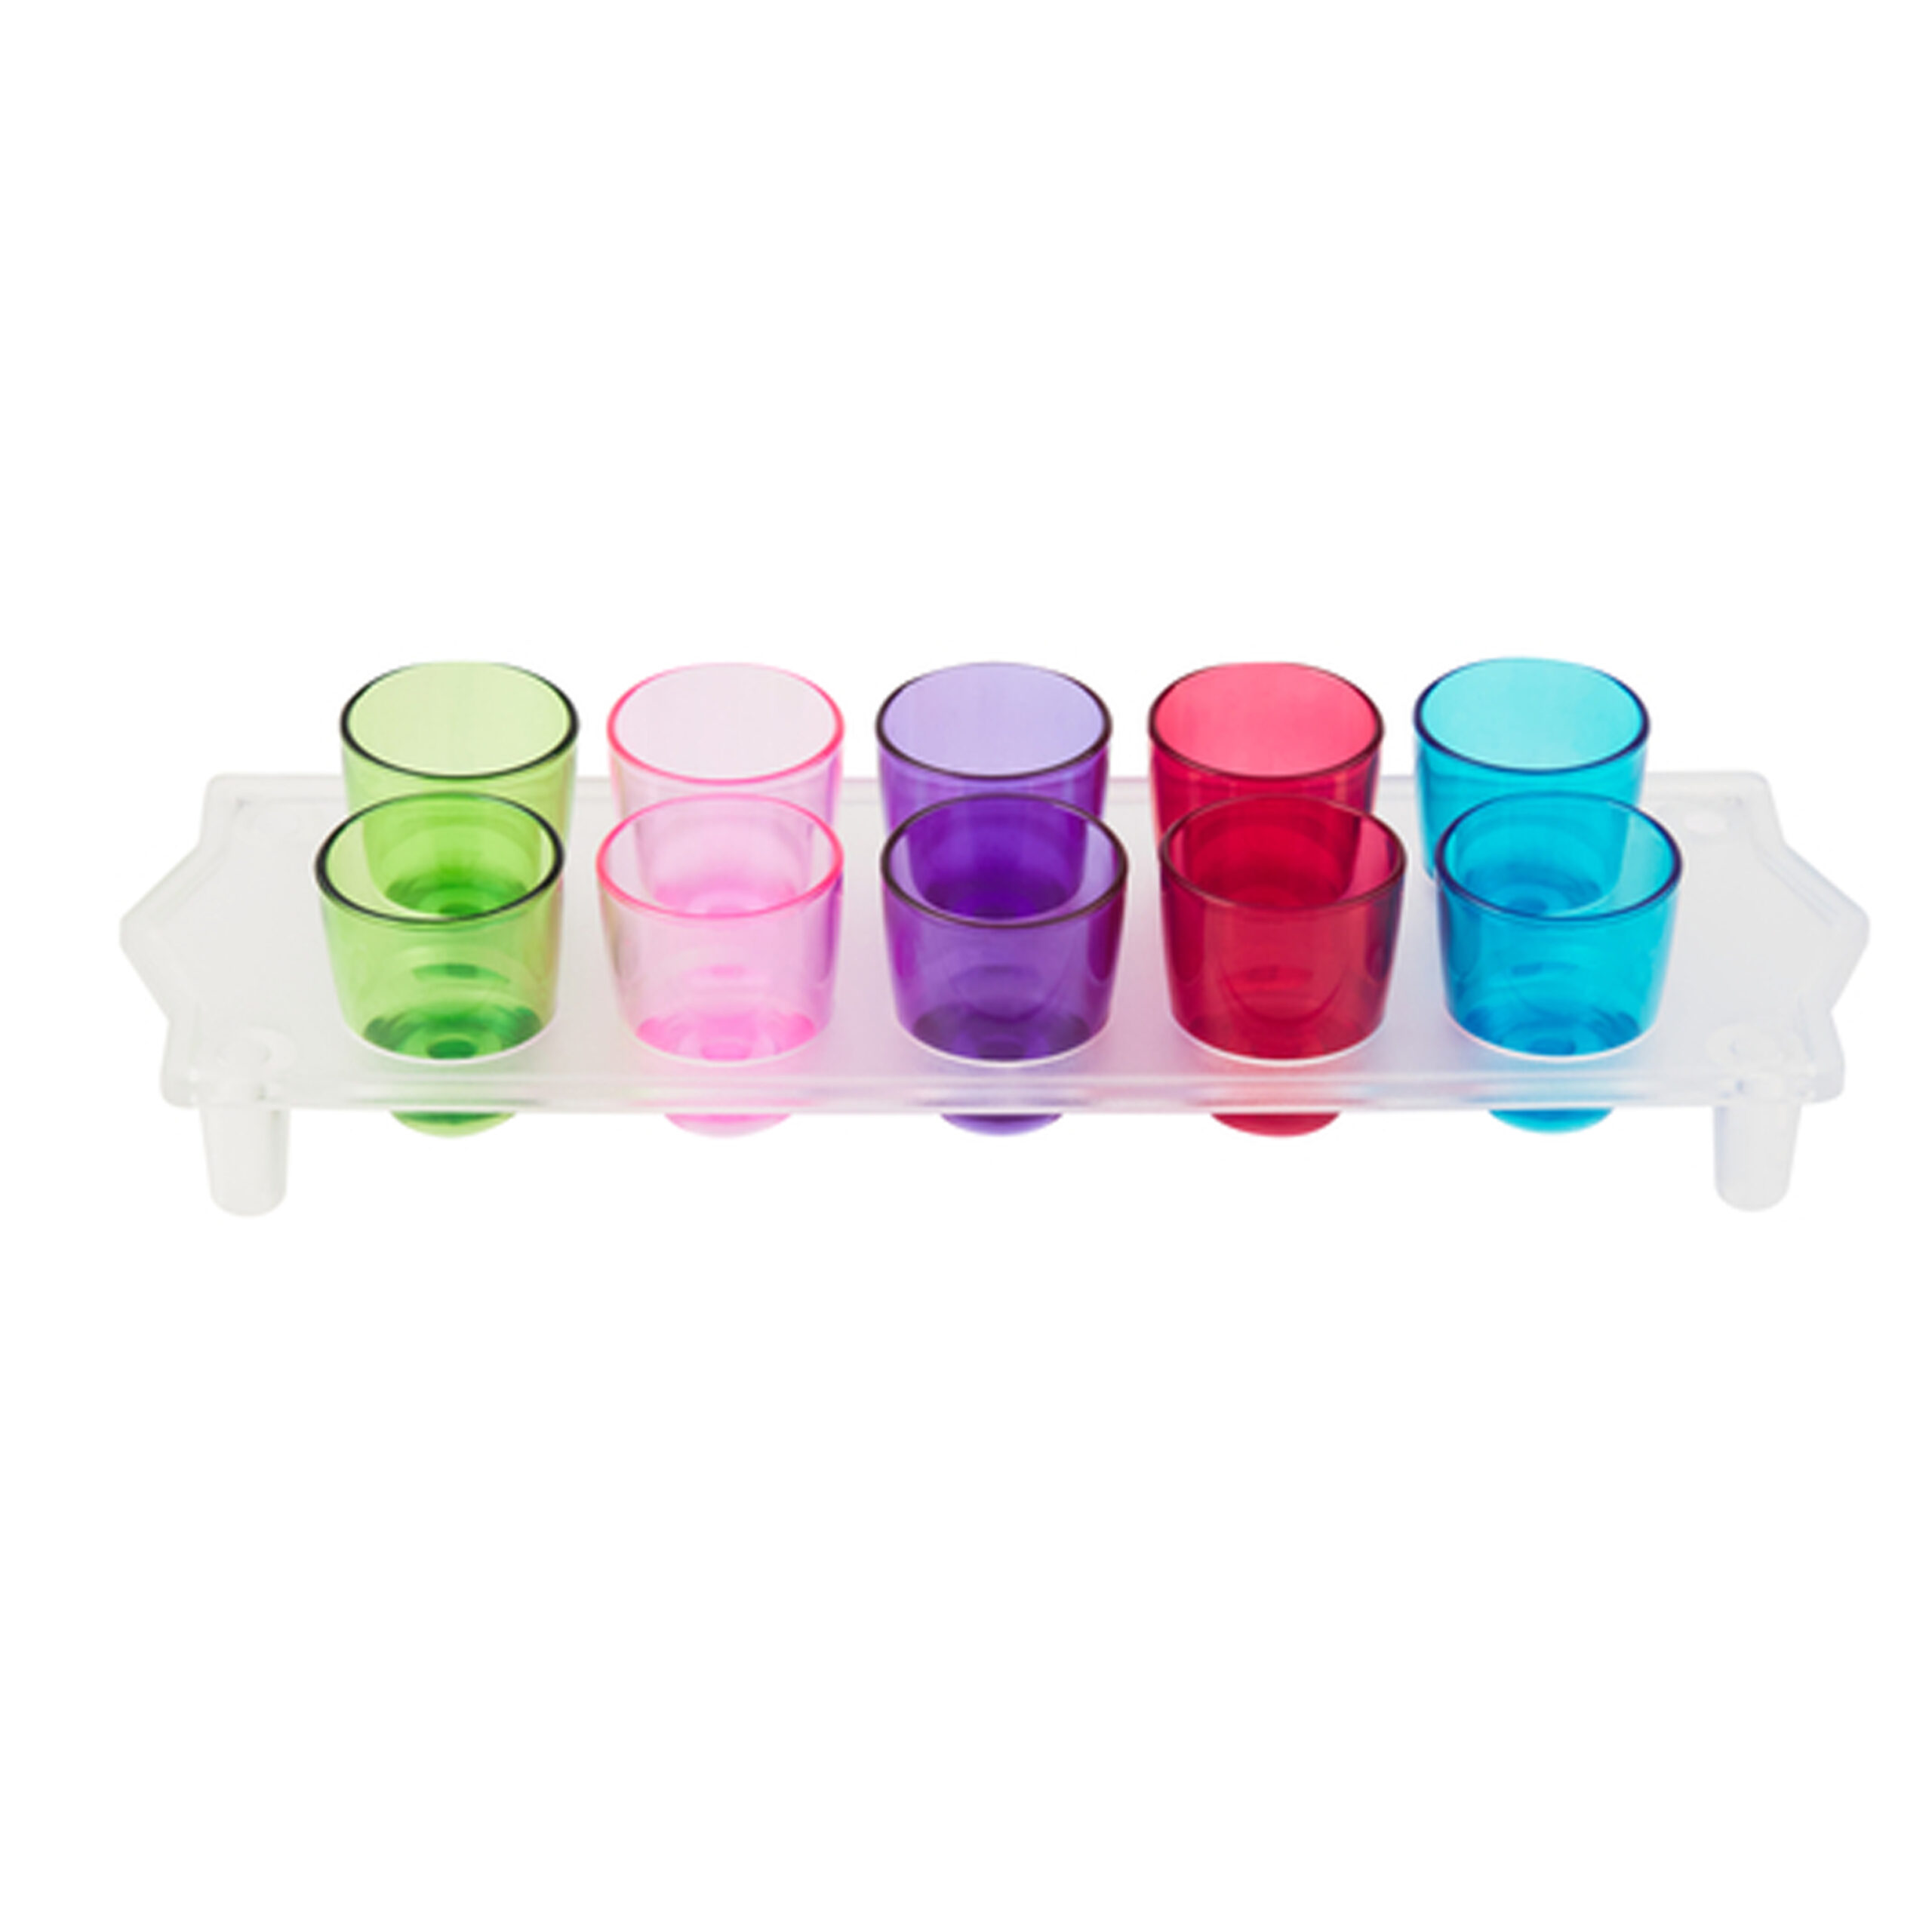 SHOT GLASS IN
TRAY  25ml  MIX
COLOURS  (1x10pc)